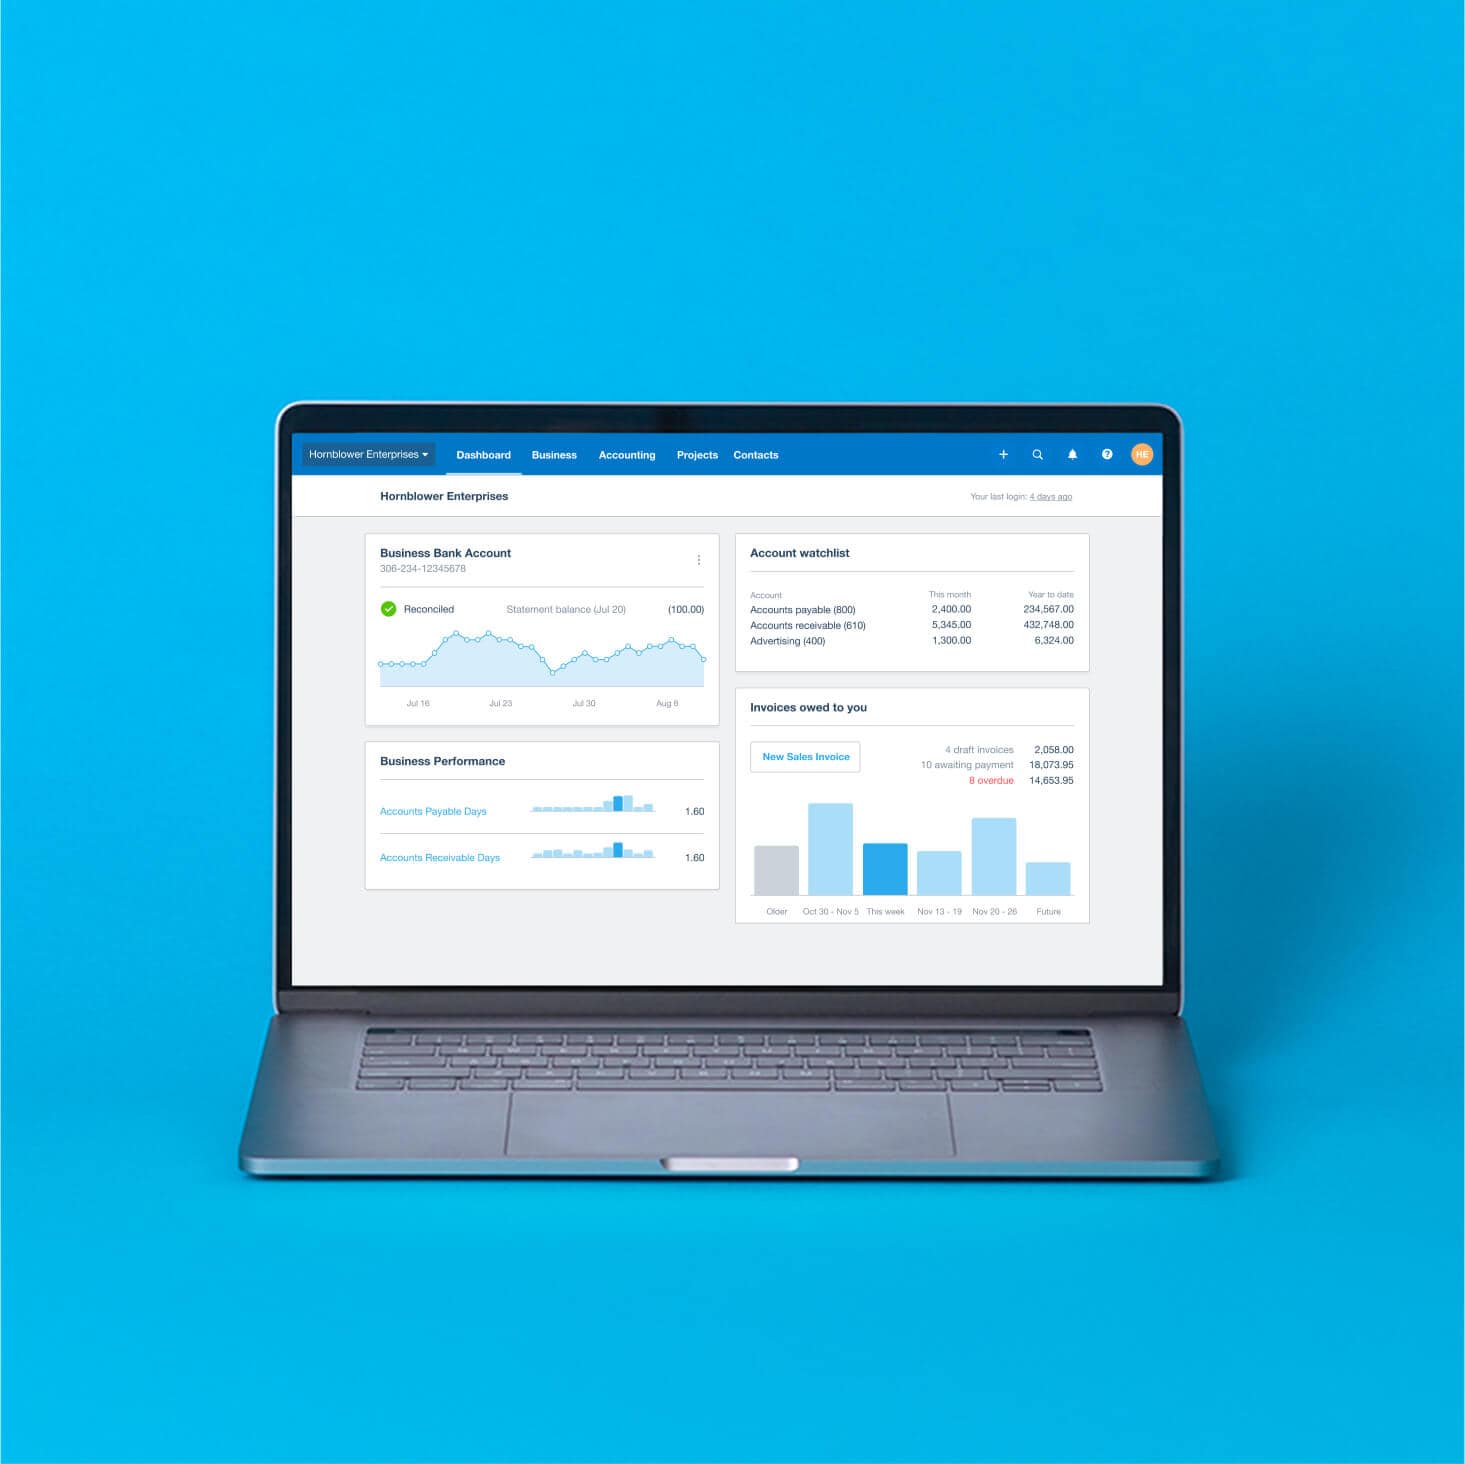 The Xero dashboard displays charts and graphs that give an overview of a startup’s financial performance.